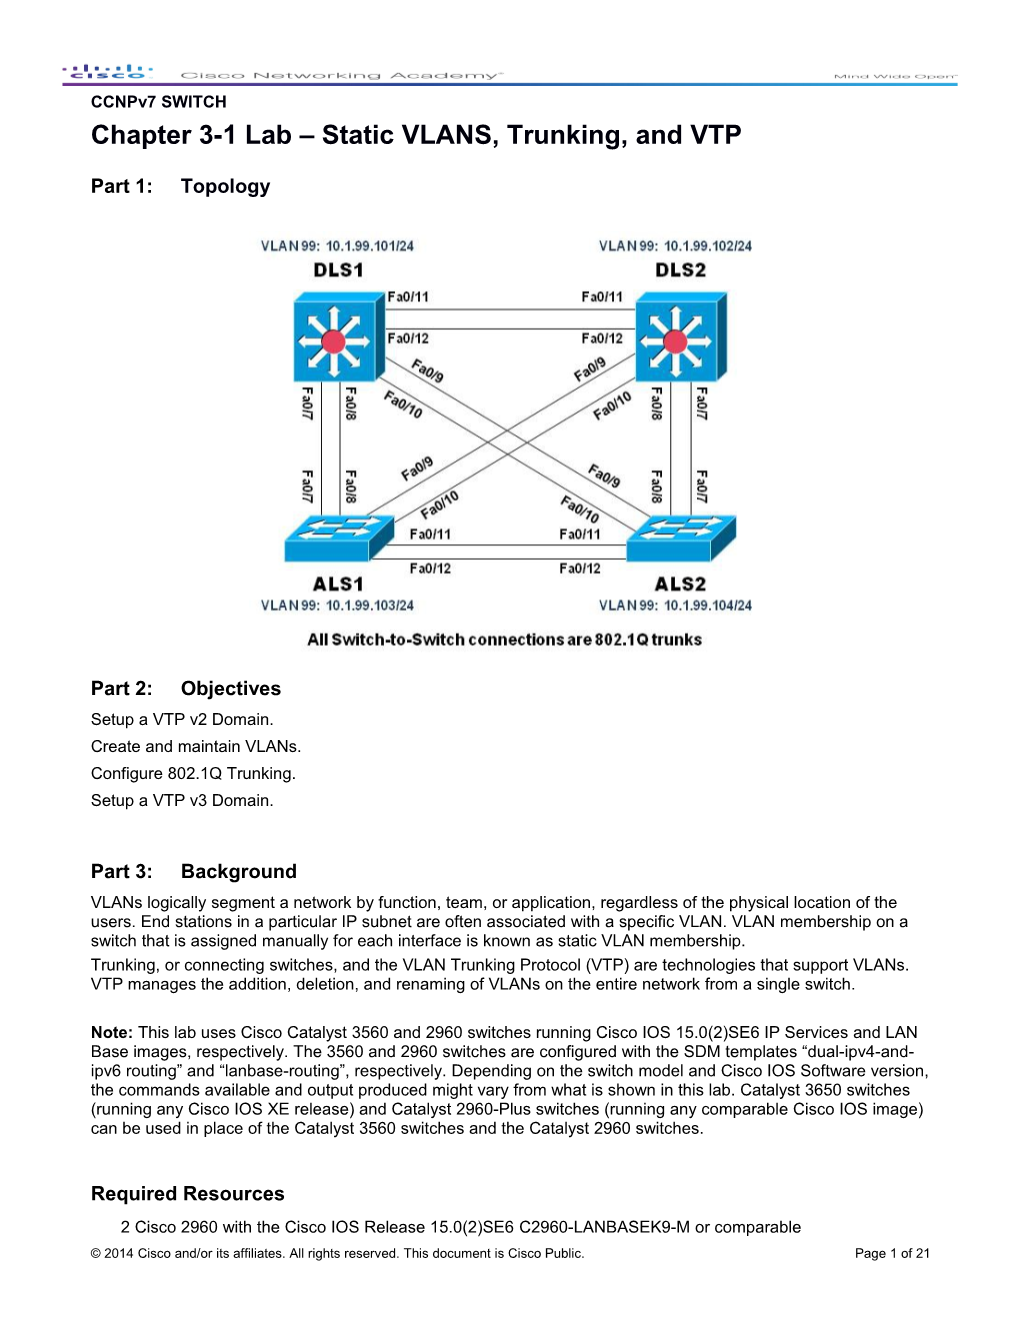 Ccnpv7 SWITCH: Lab 3-1 Static VLANS, Trunking, and VTP